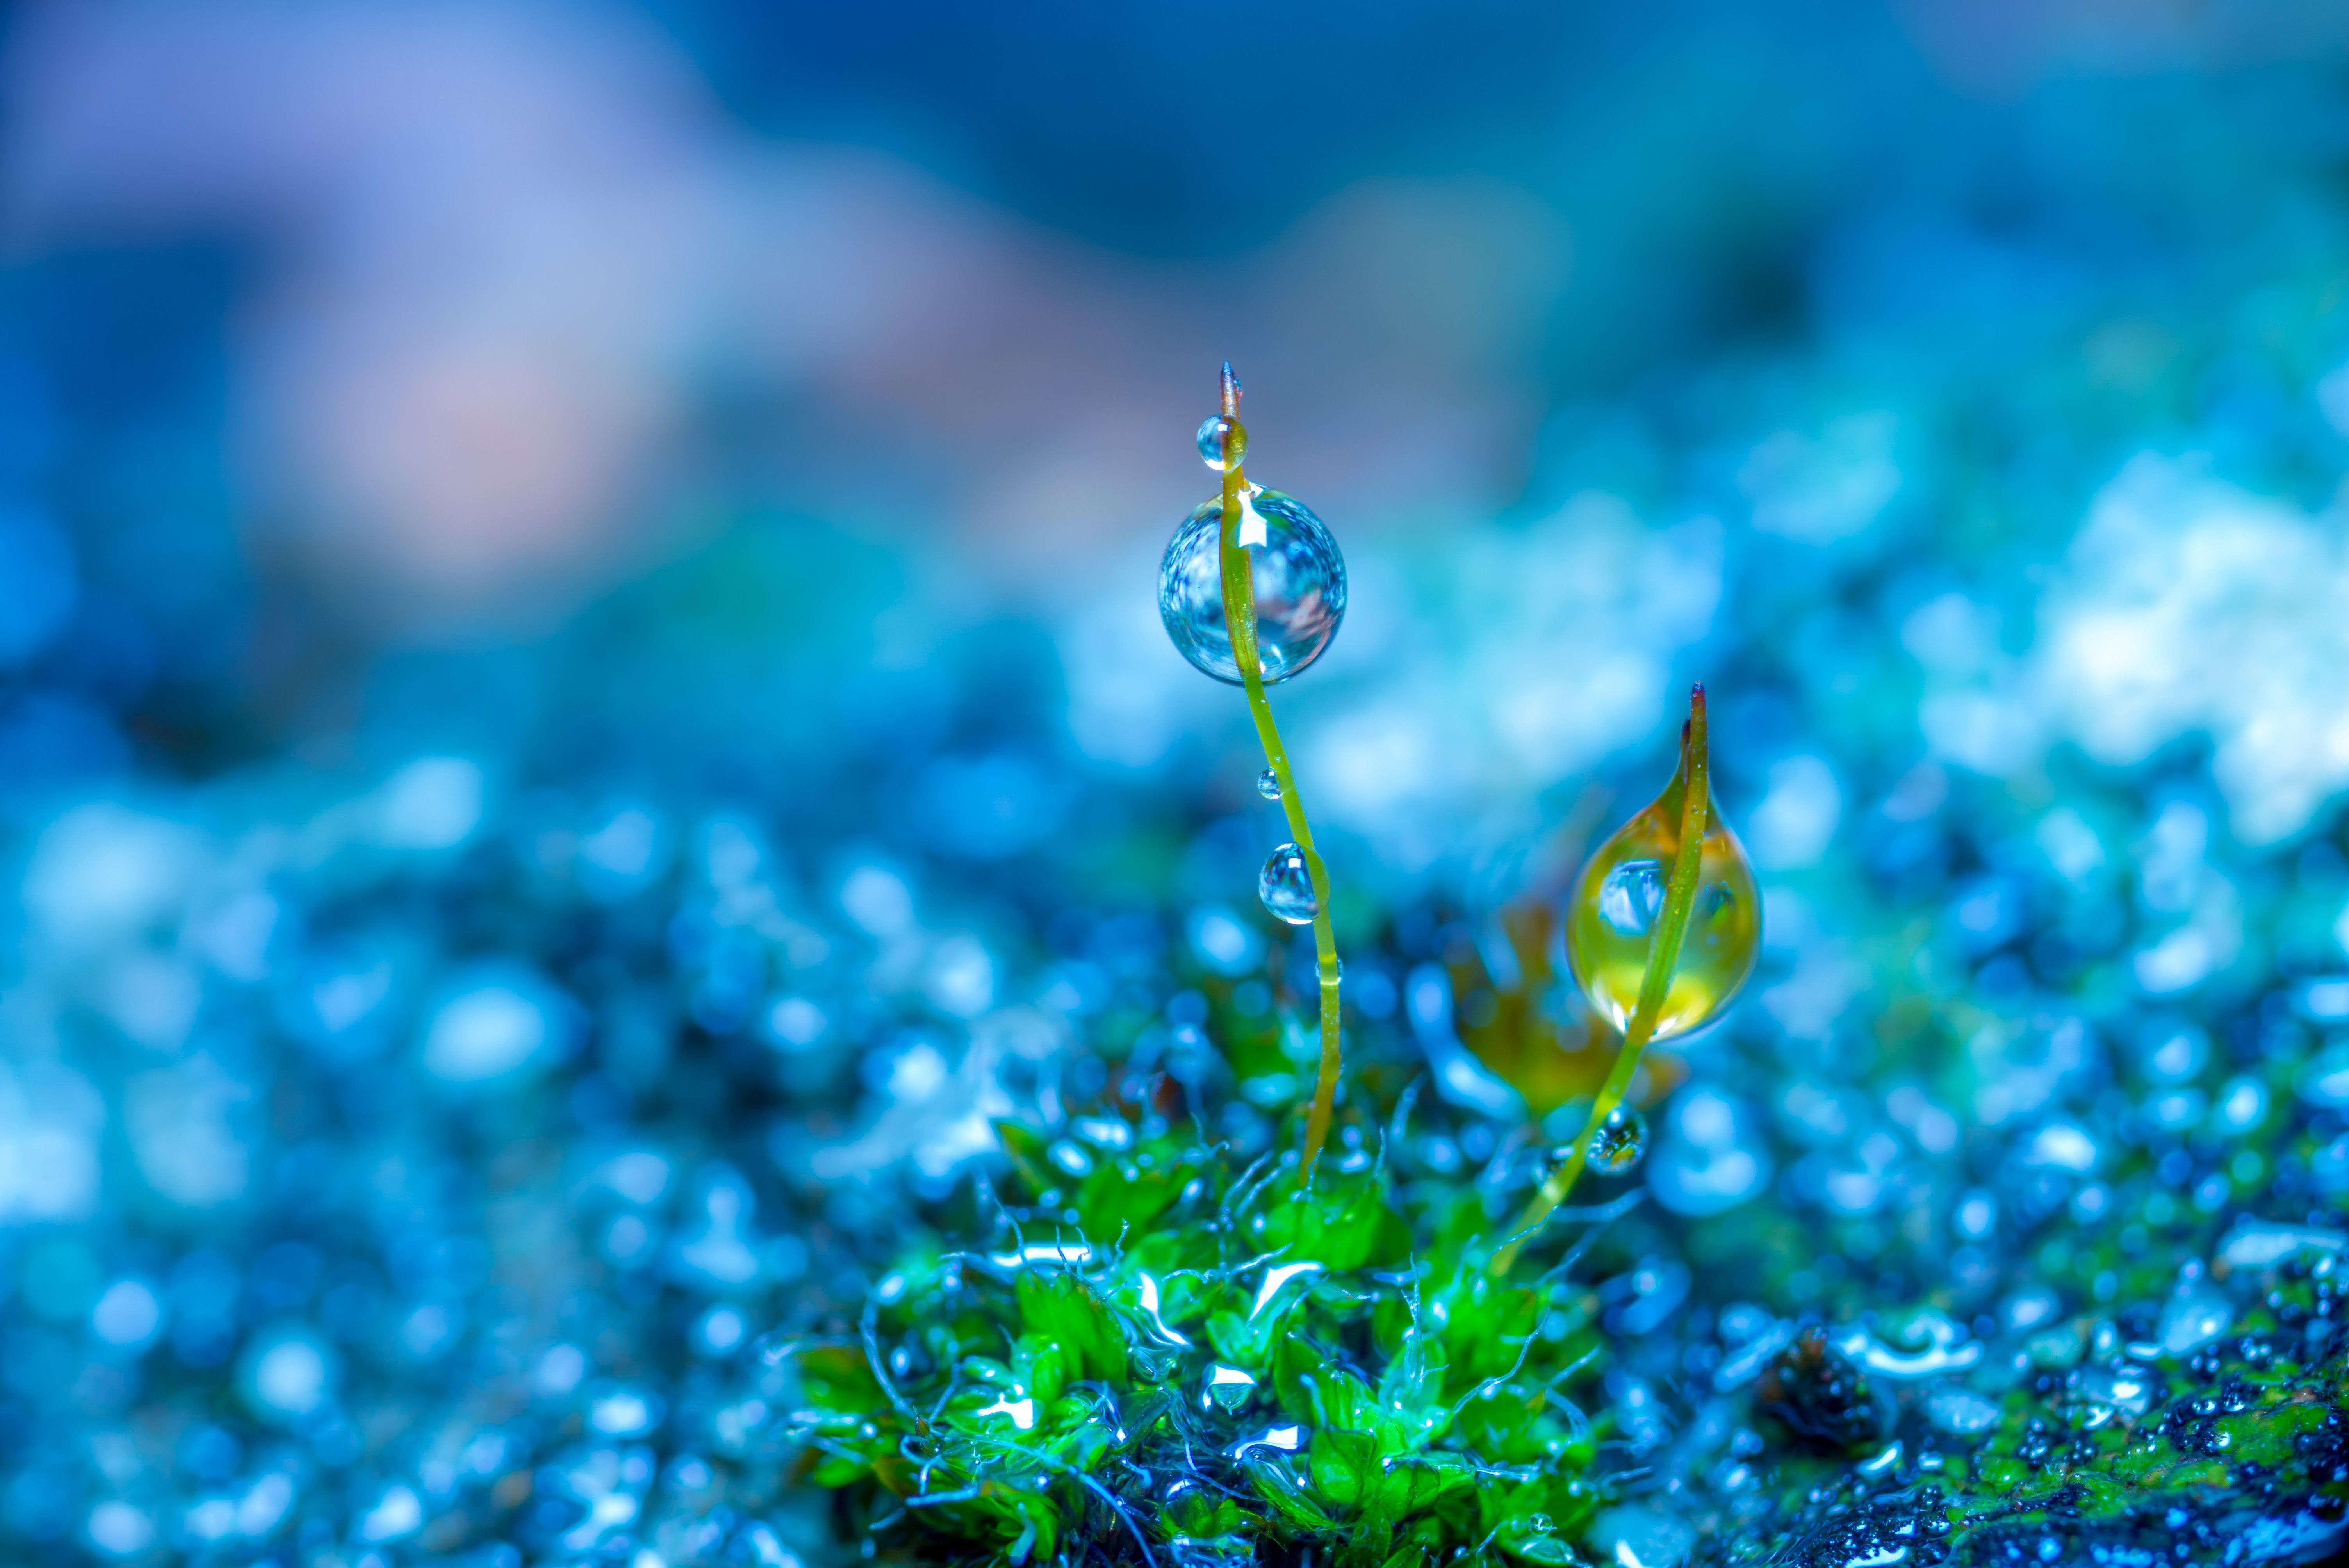 Wallpaper, 6016x4016 px, blue, colorful, depth of field, green, macro, nature, photo manipulation, plants, water drops 6016x4016